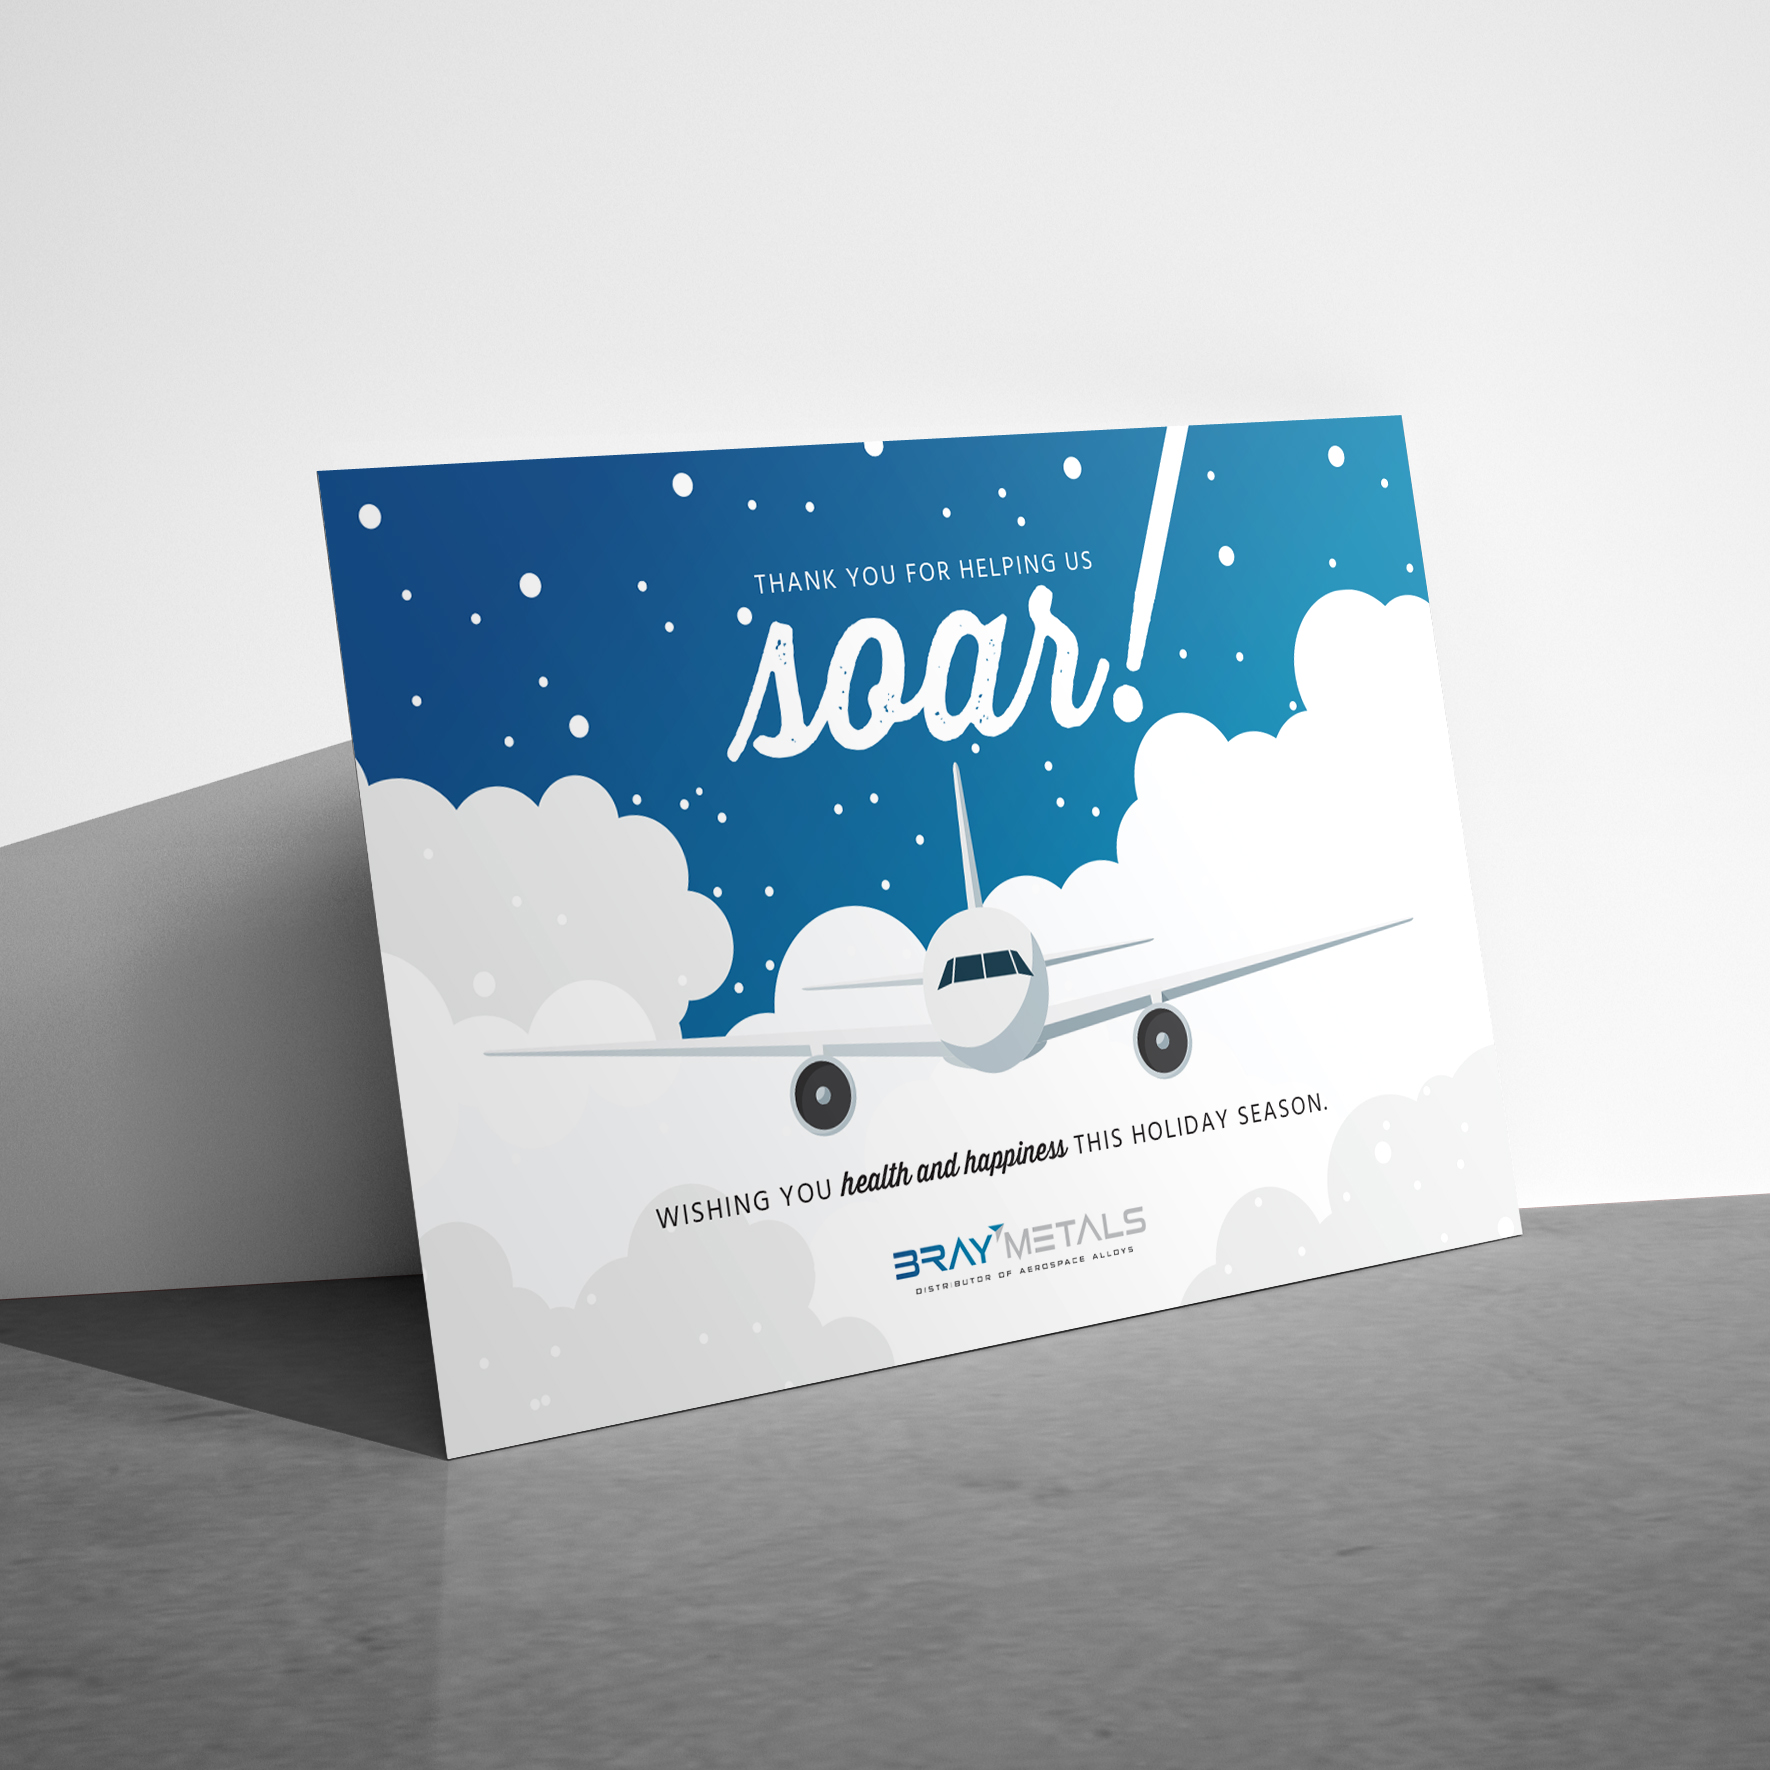 2019 Holiday Season postcard with illustration of a plane and the words 'thank you for helping us soar'. Designed for Bray Metals.